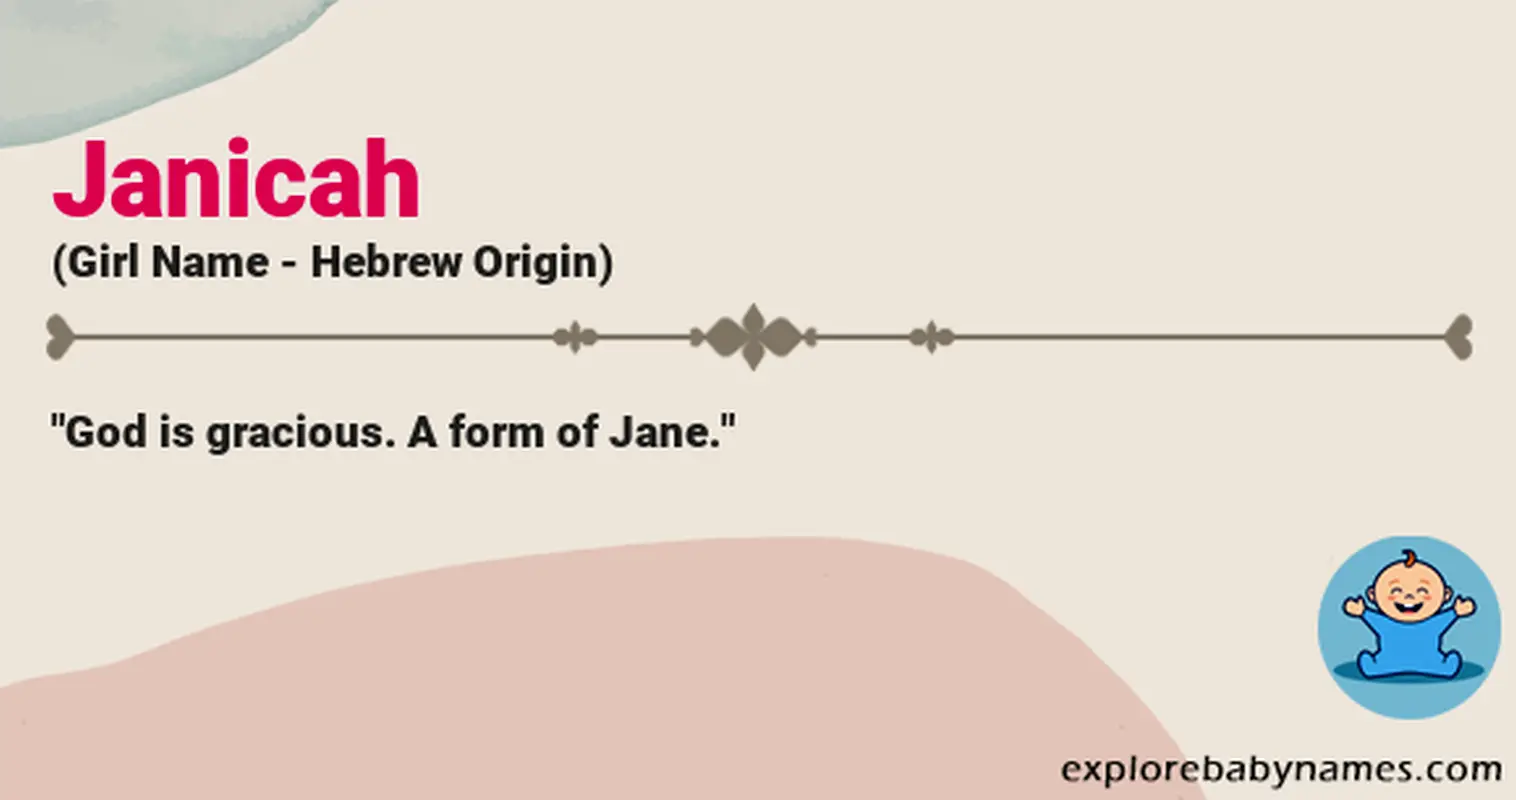 Meaning of Janicah